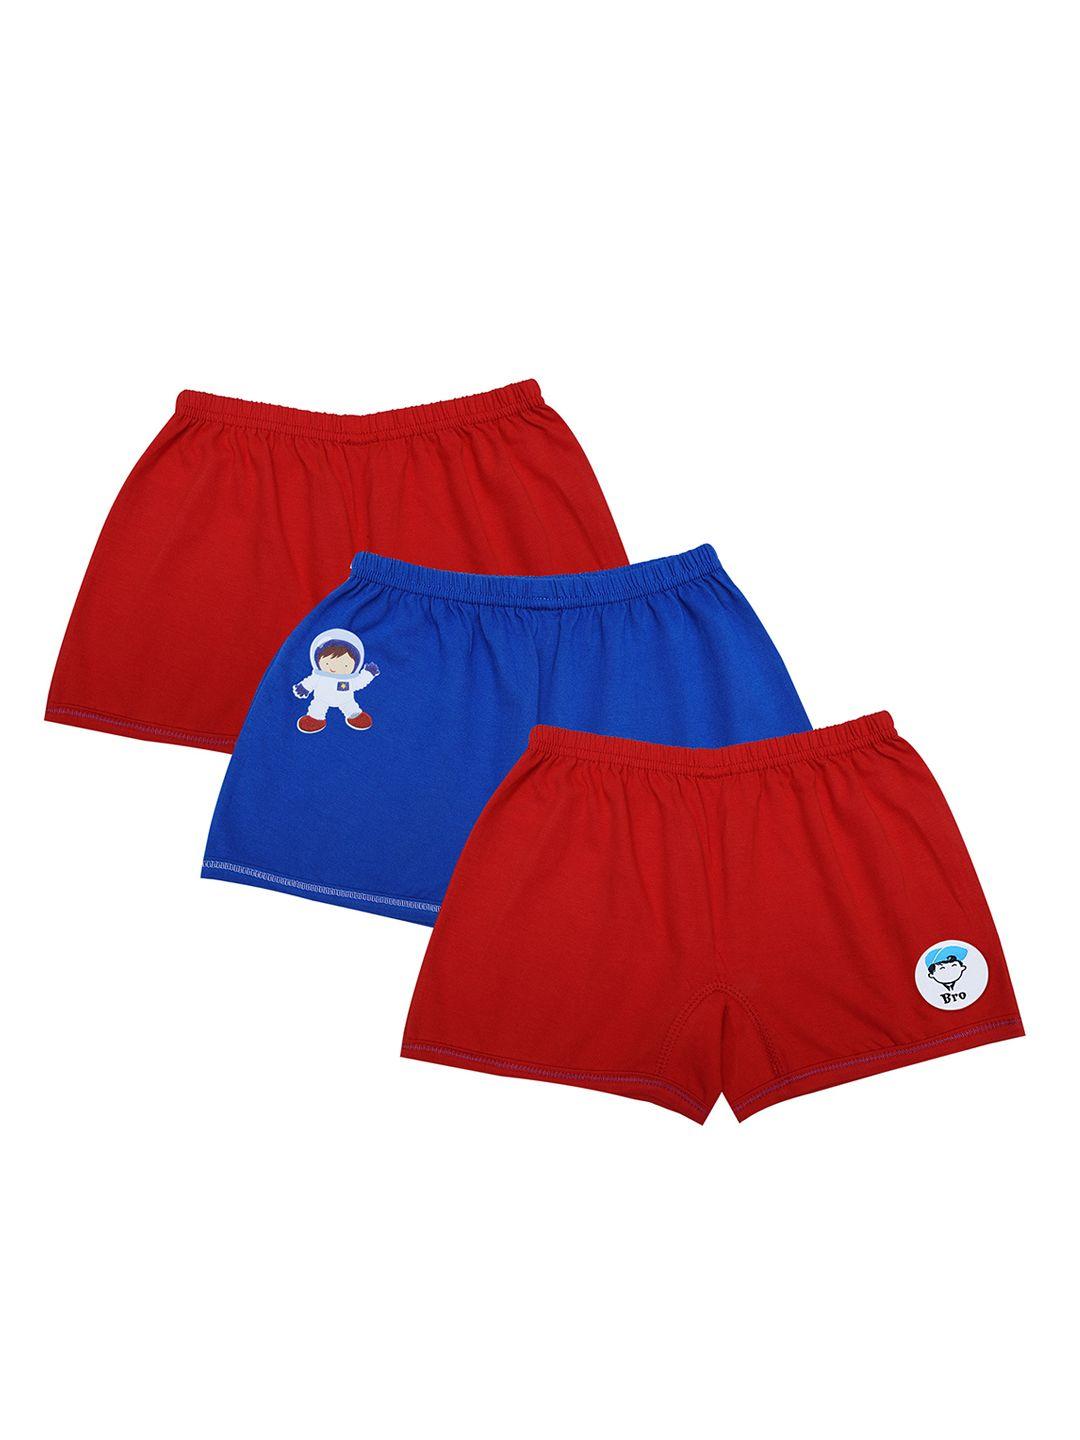 dchica boys set of 3 red & blue solid soft cotton boxers